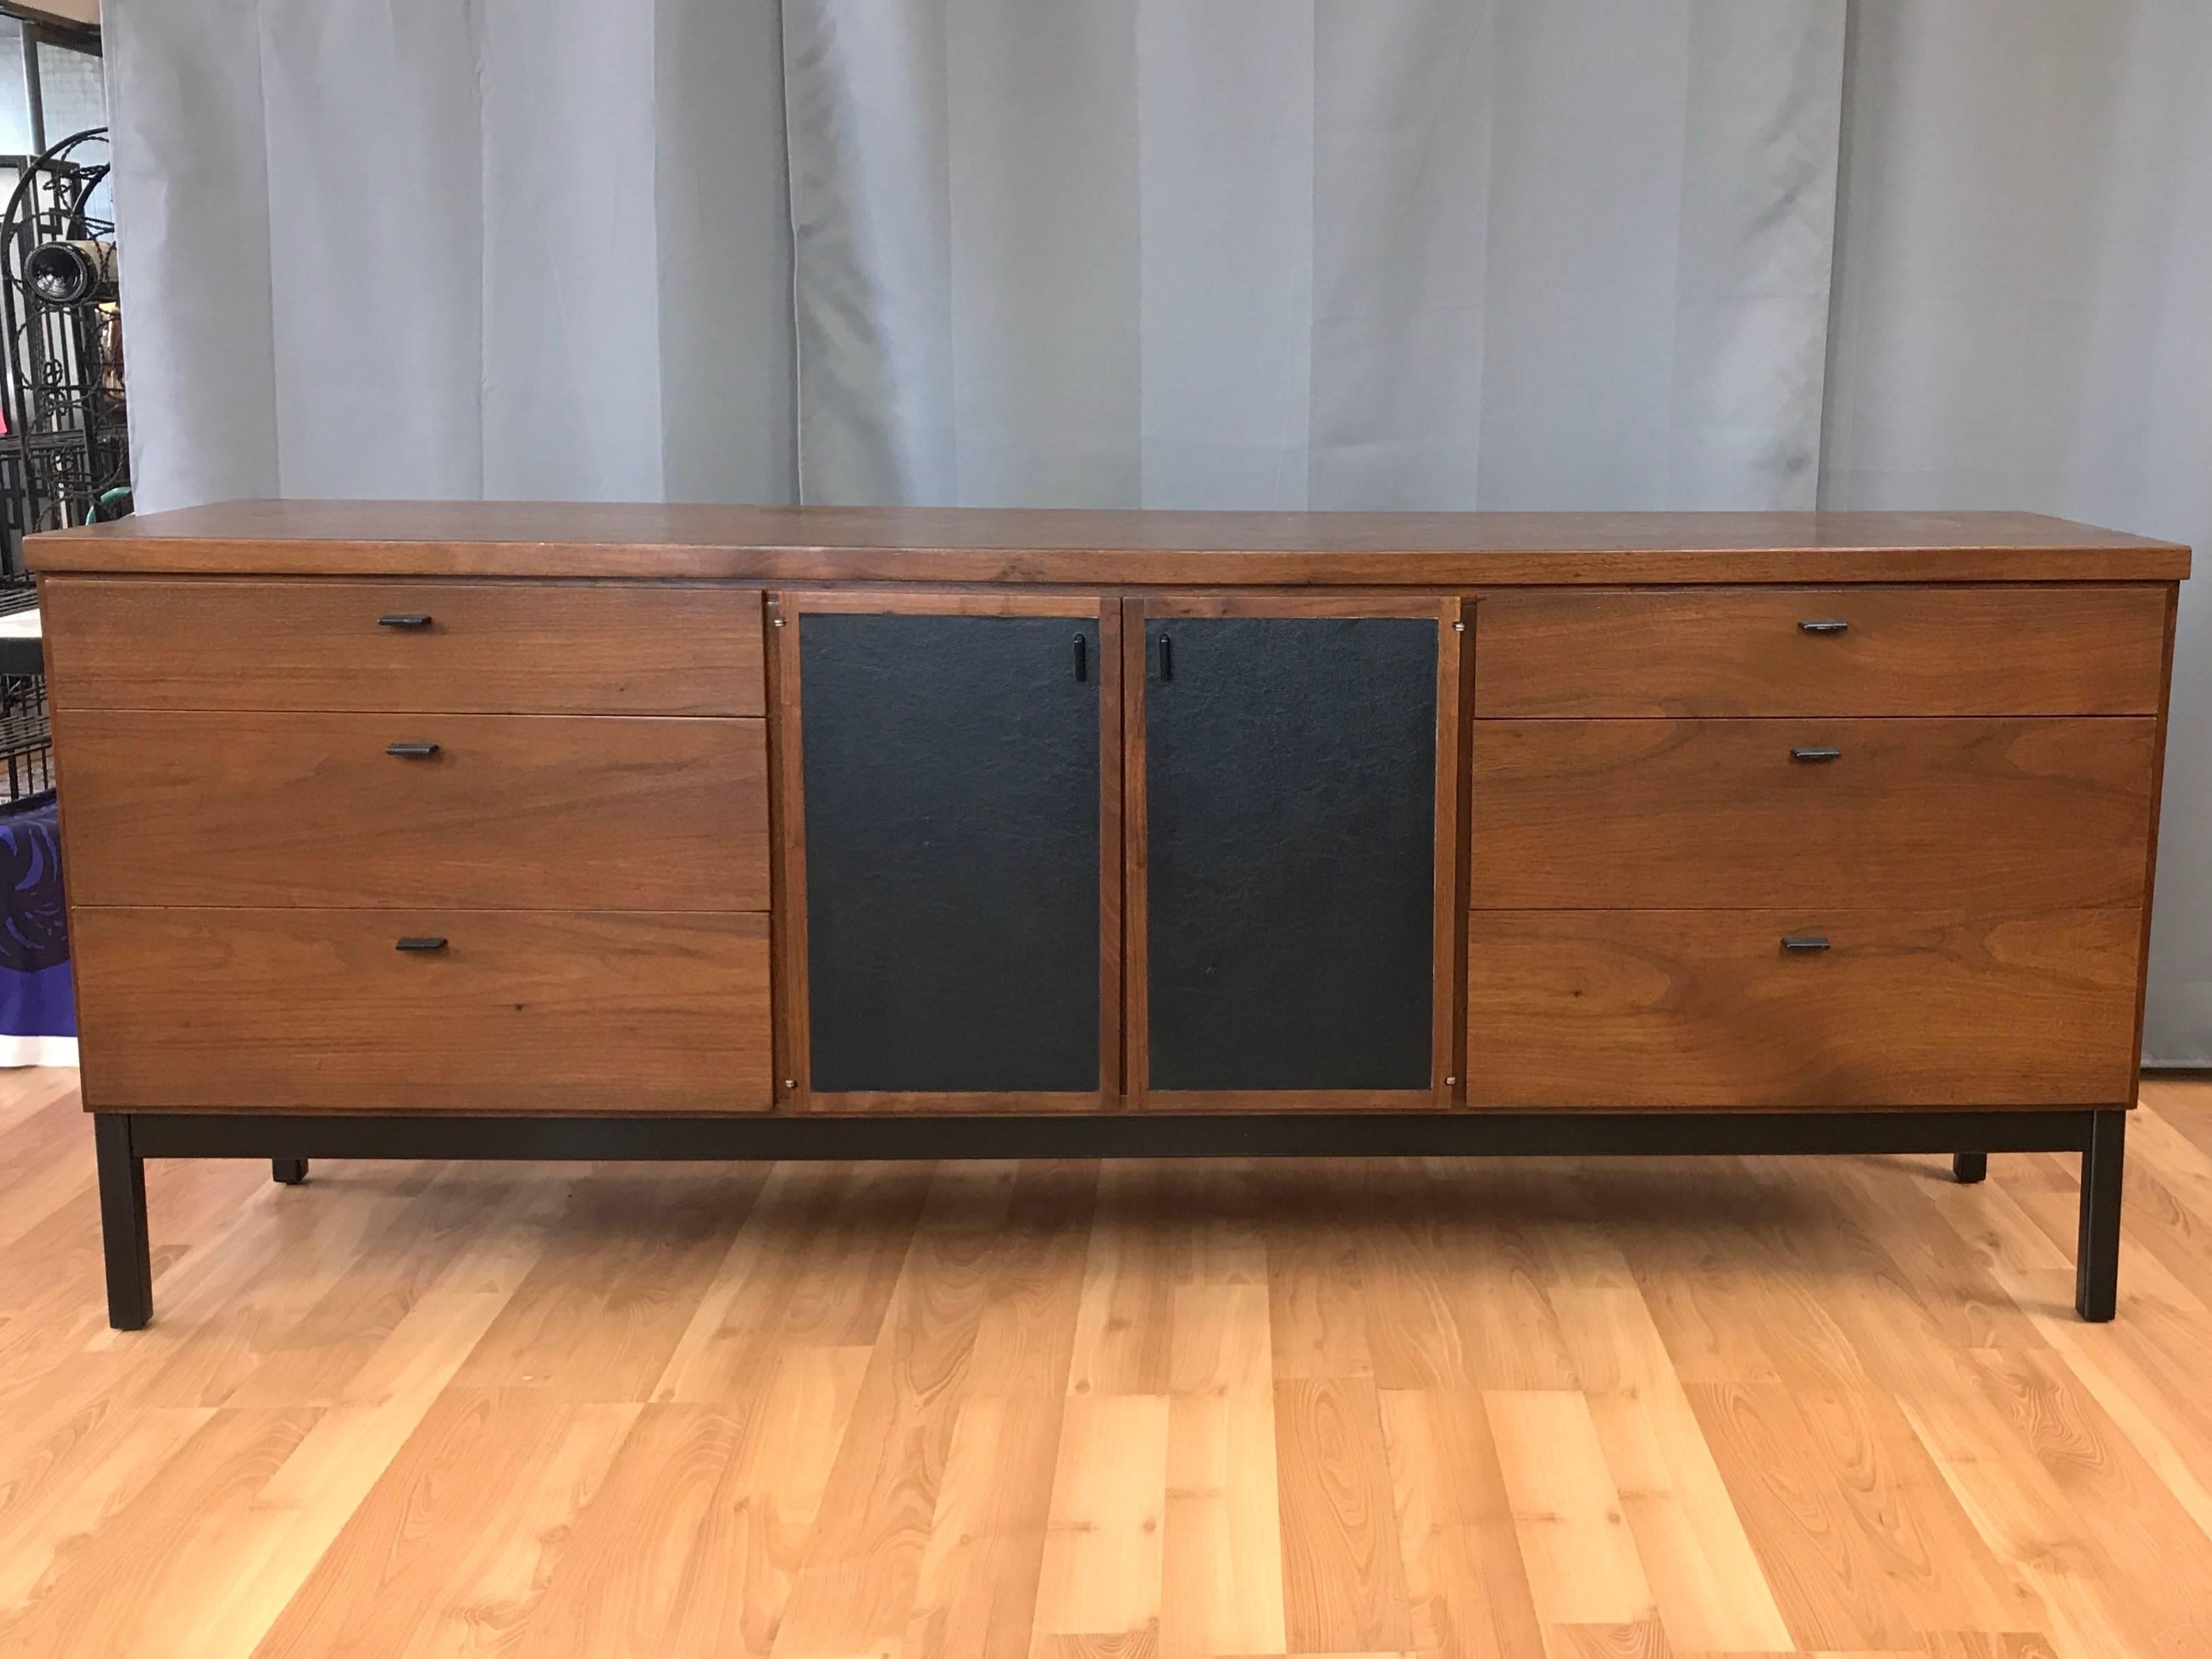 An expansive nine-drawer walnut dresser by Milo Baughman for Directional.

A very fine example of handsomely understated American mid-century modern design. Three drawers on either end with nicely highlighted dovetail joinery. A pair of doors